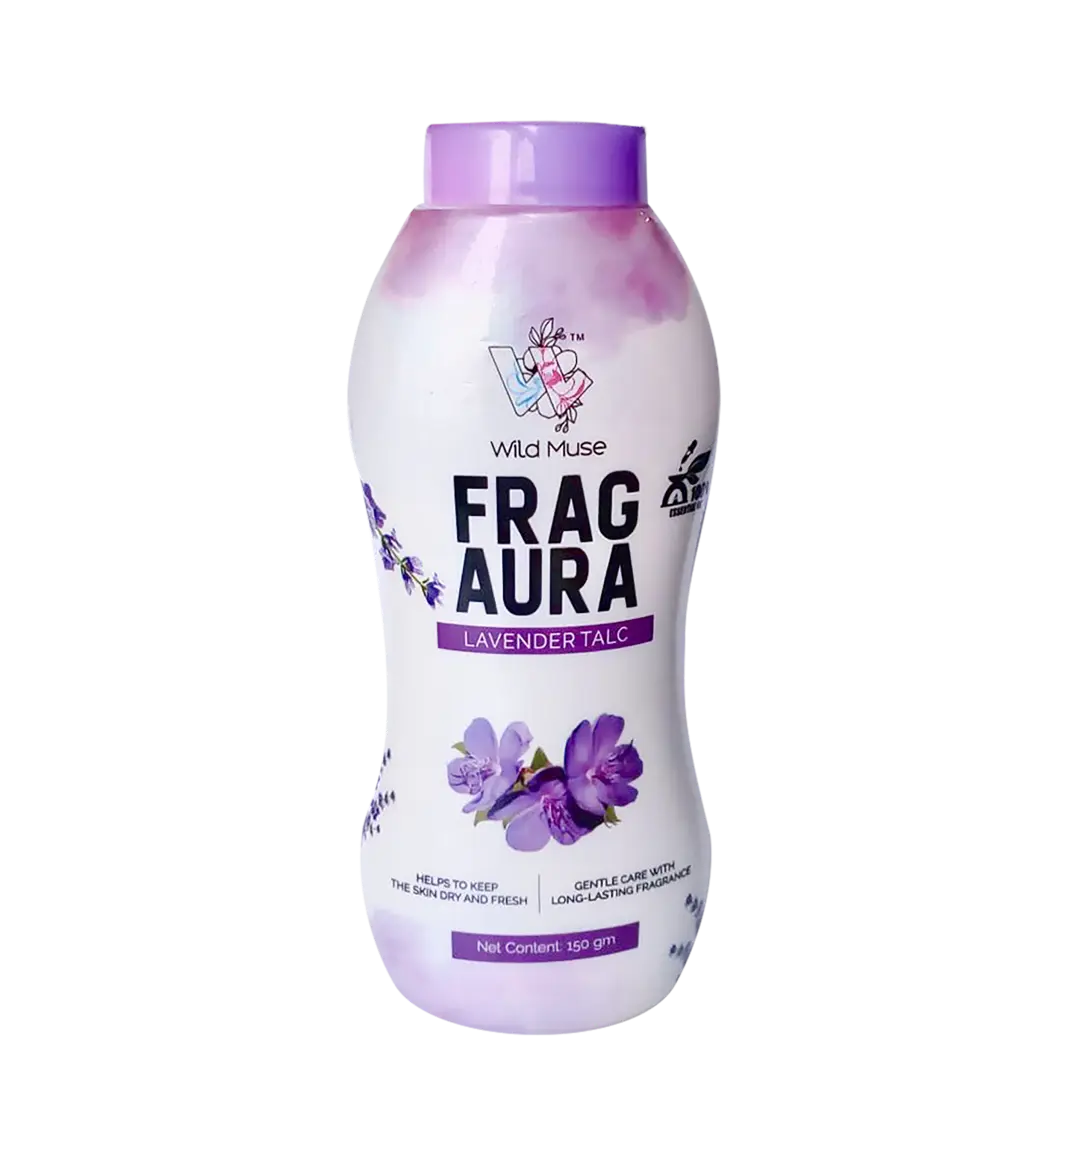 FragAura Lavender Talc- best talc powder. Let this summer cool and refresh